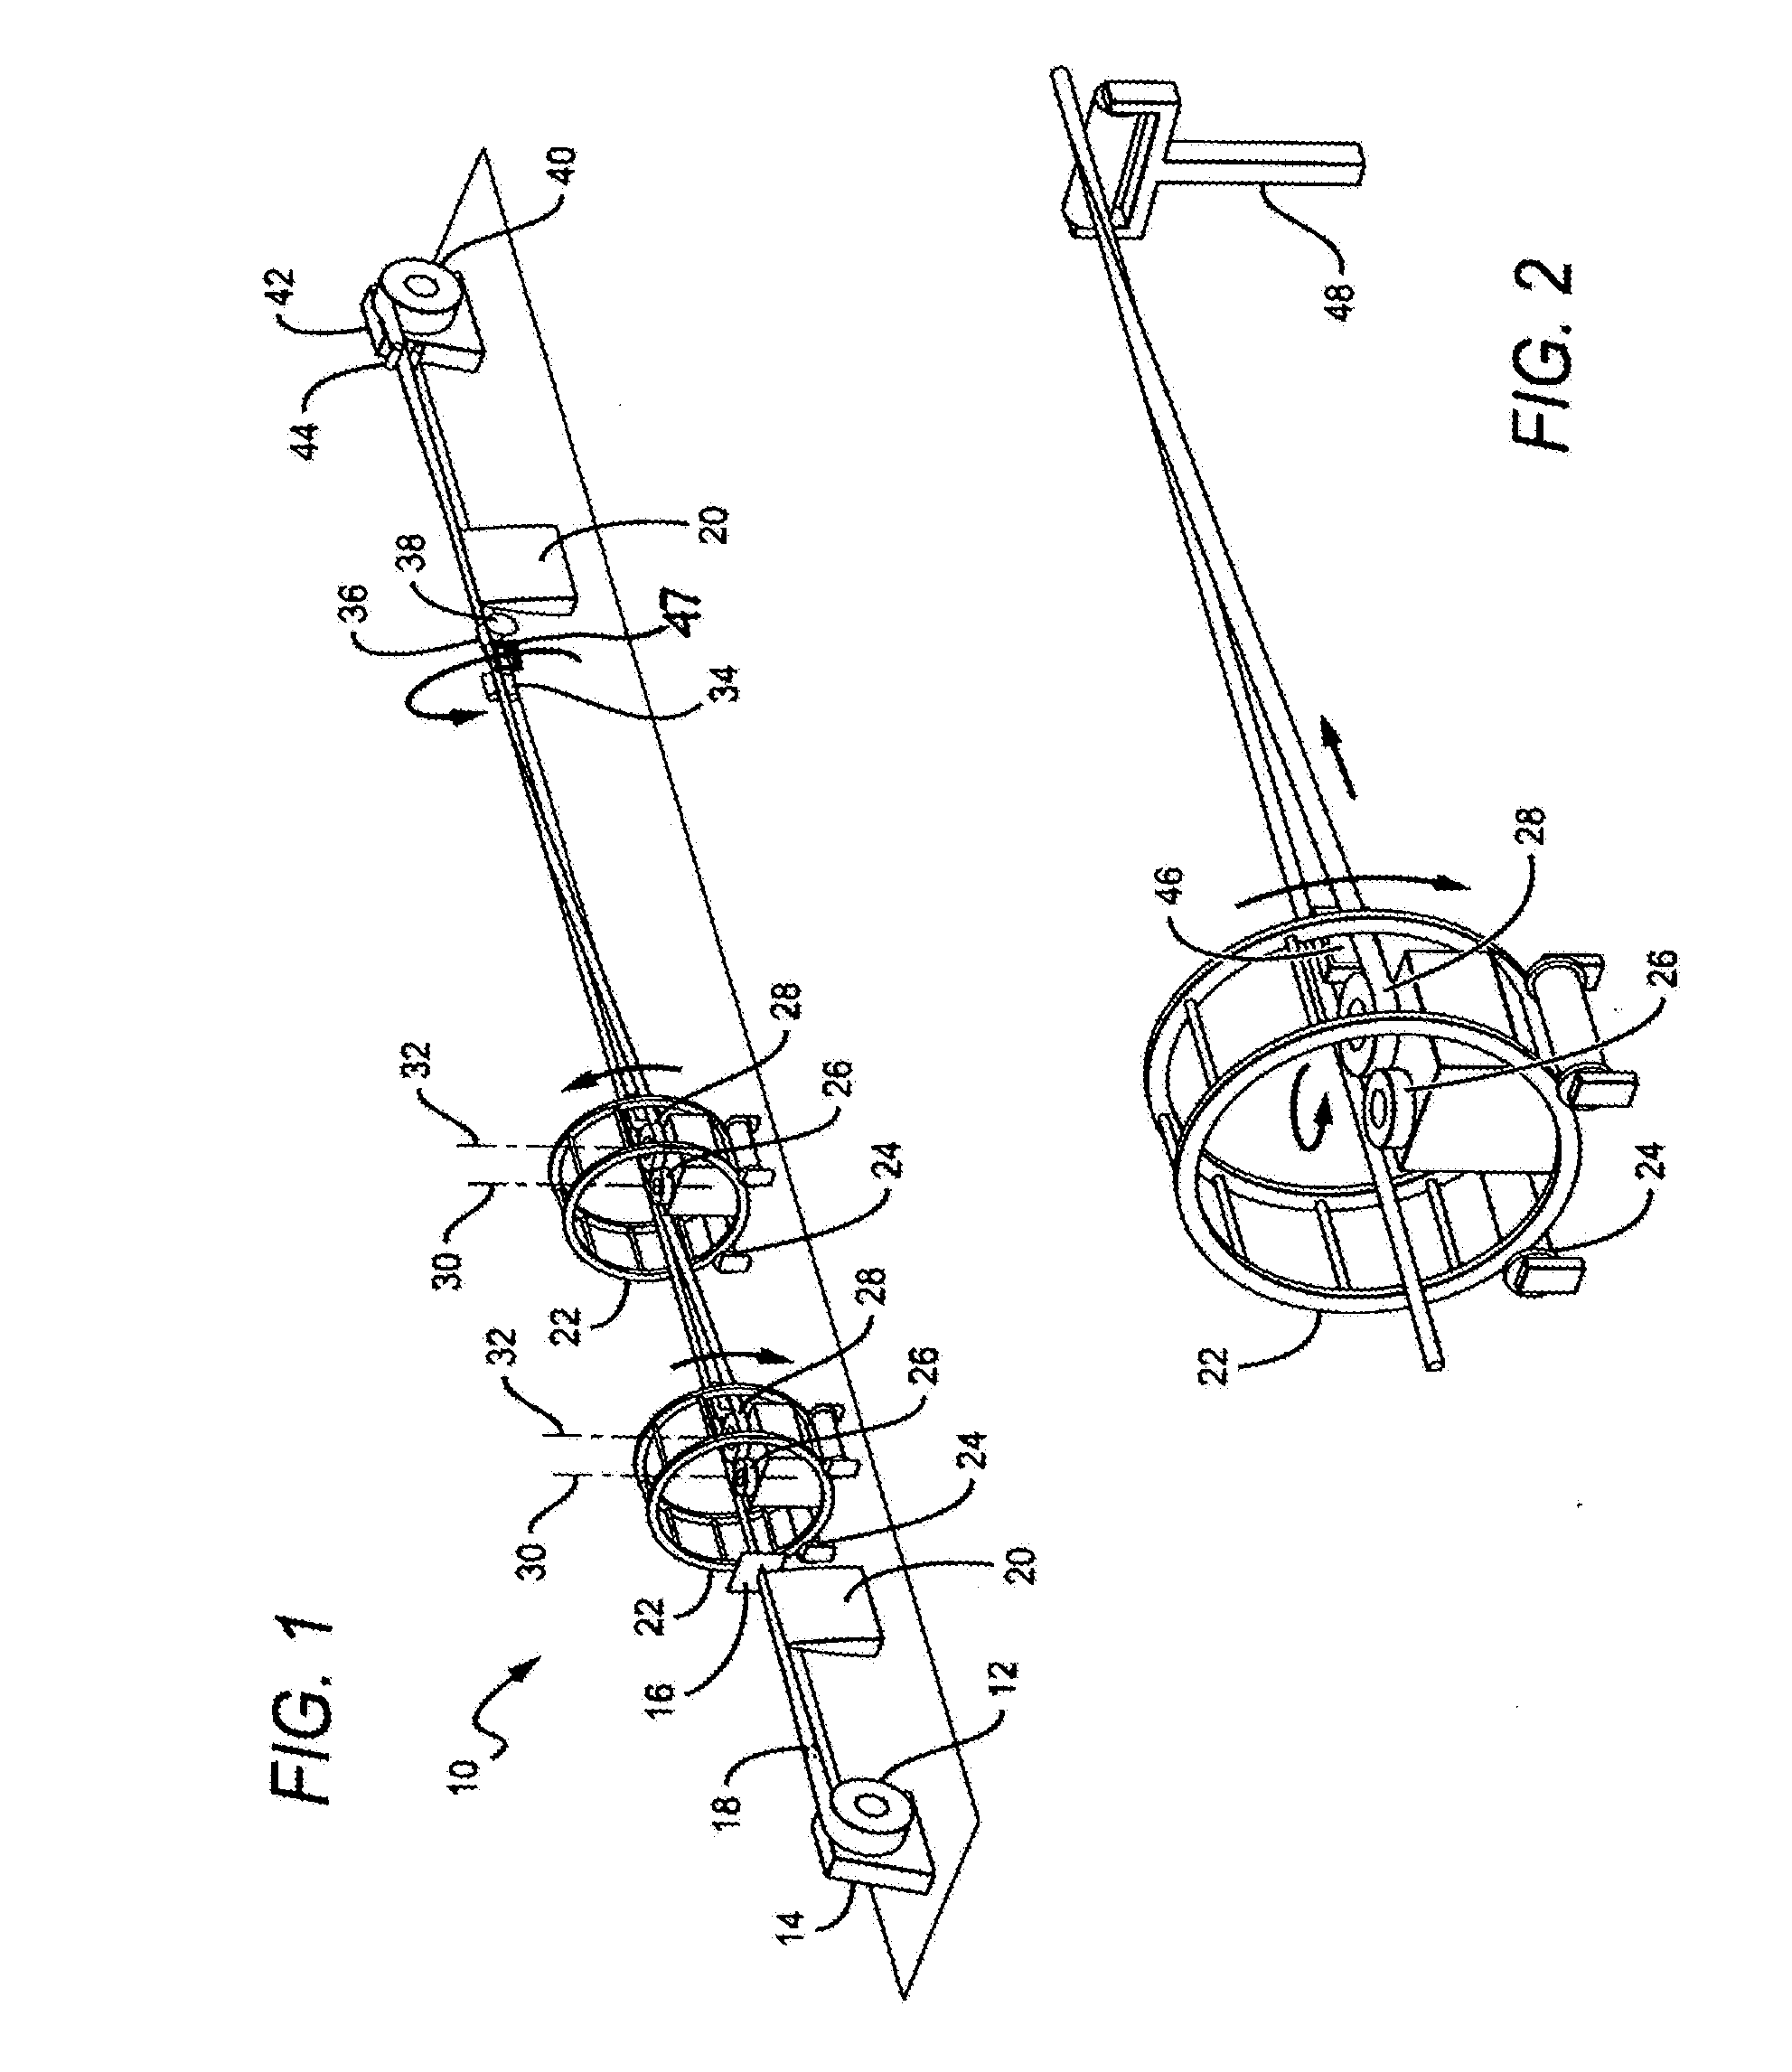 Method and Apparatus for Producing Off-Axis Composite Prepreg Material